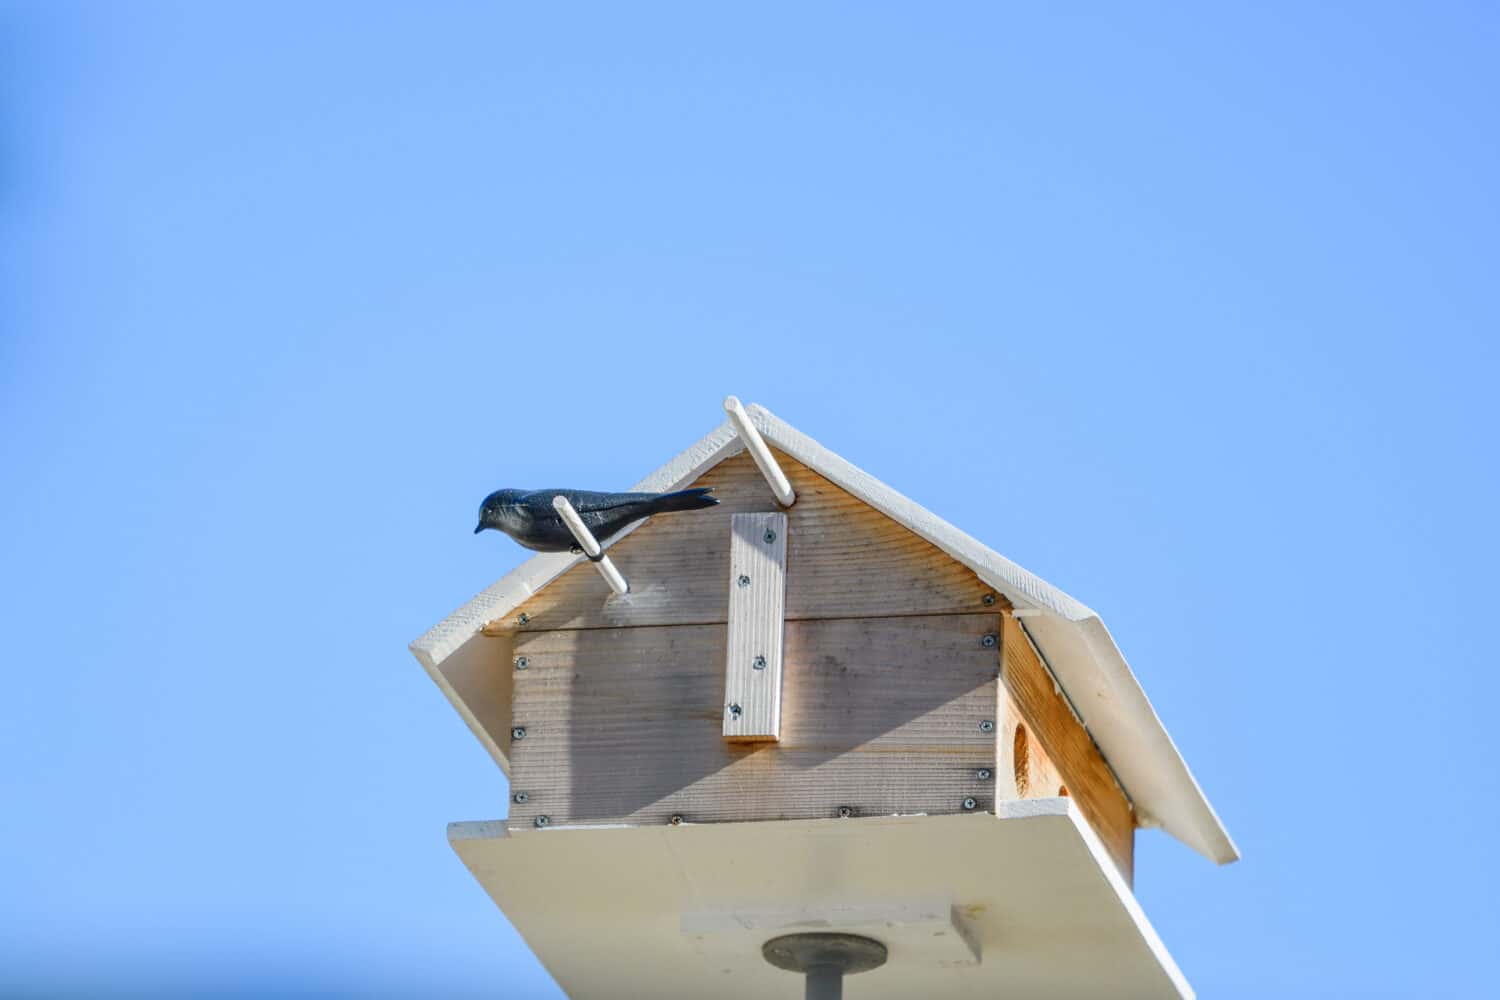 Purple martin decoy perched on bird house to attract purple martins